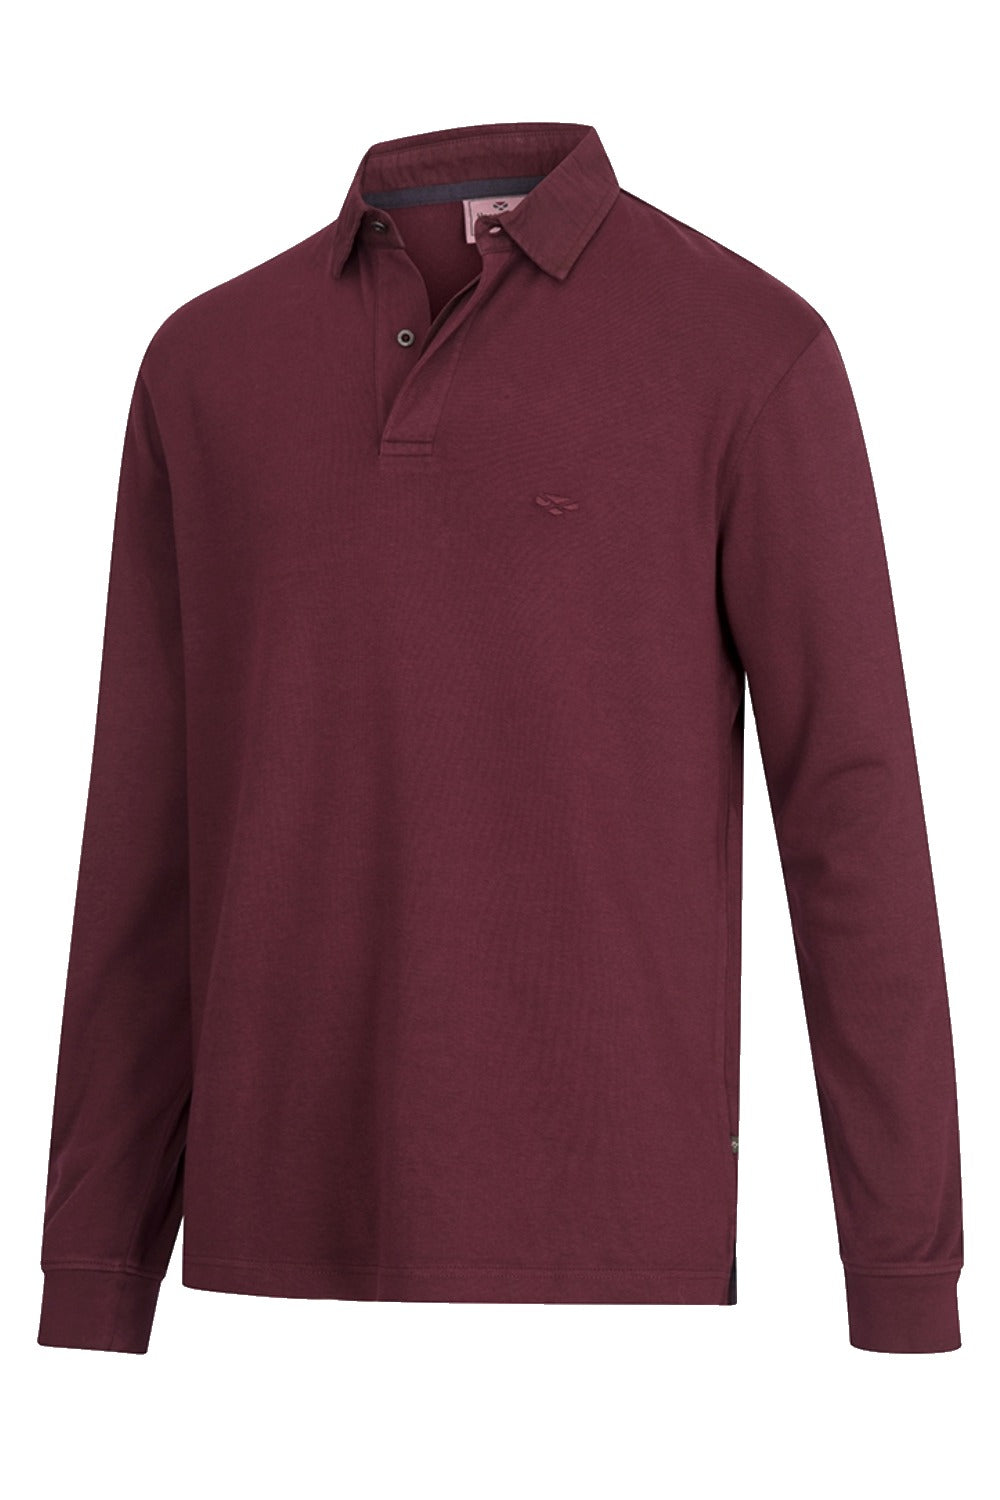 Hoggs of Fife Heriot Long Sleeve Rugby Shirt in Merlot 